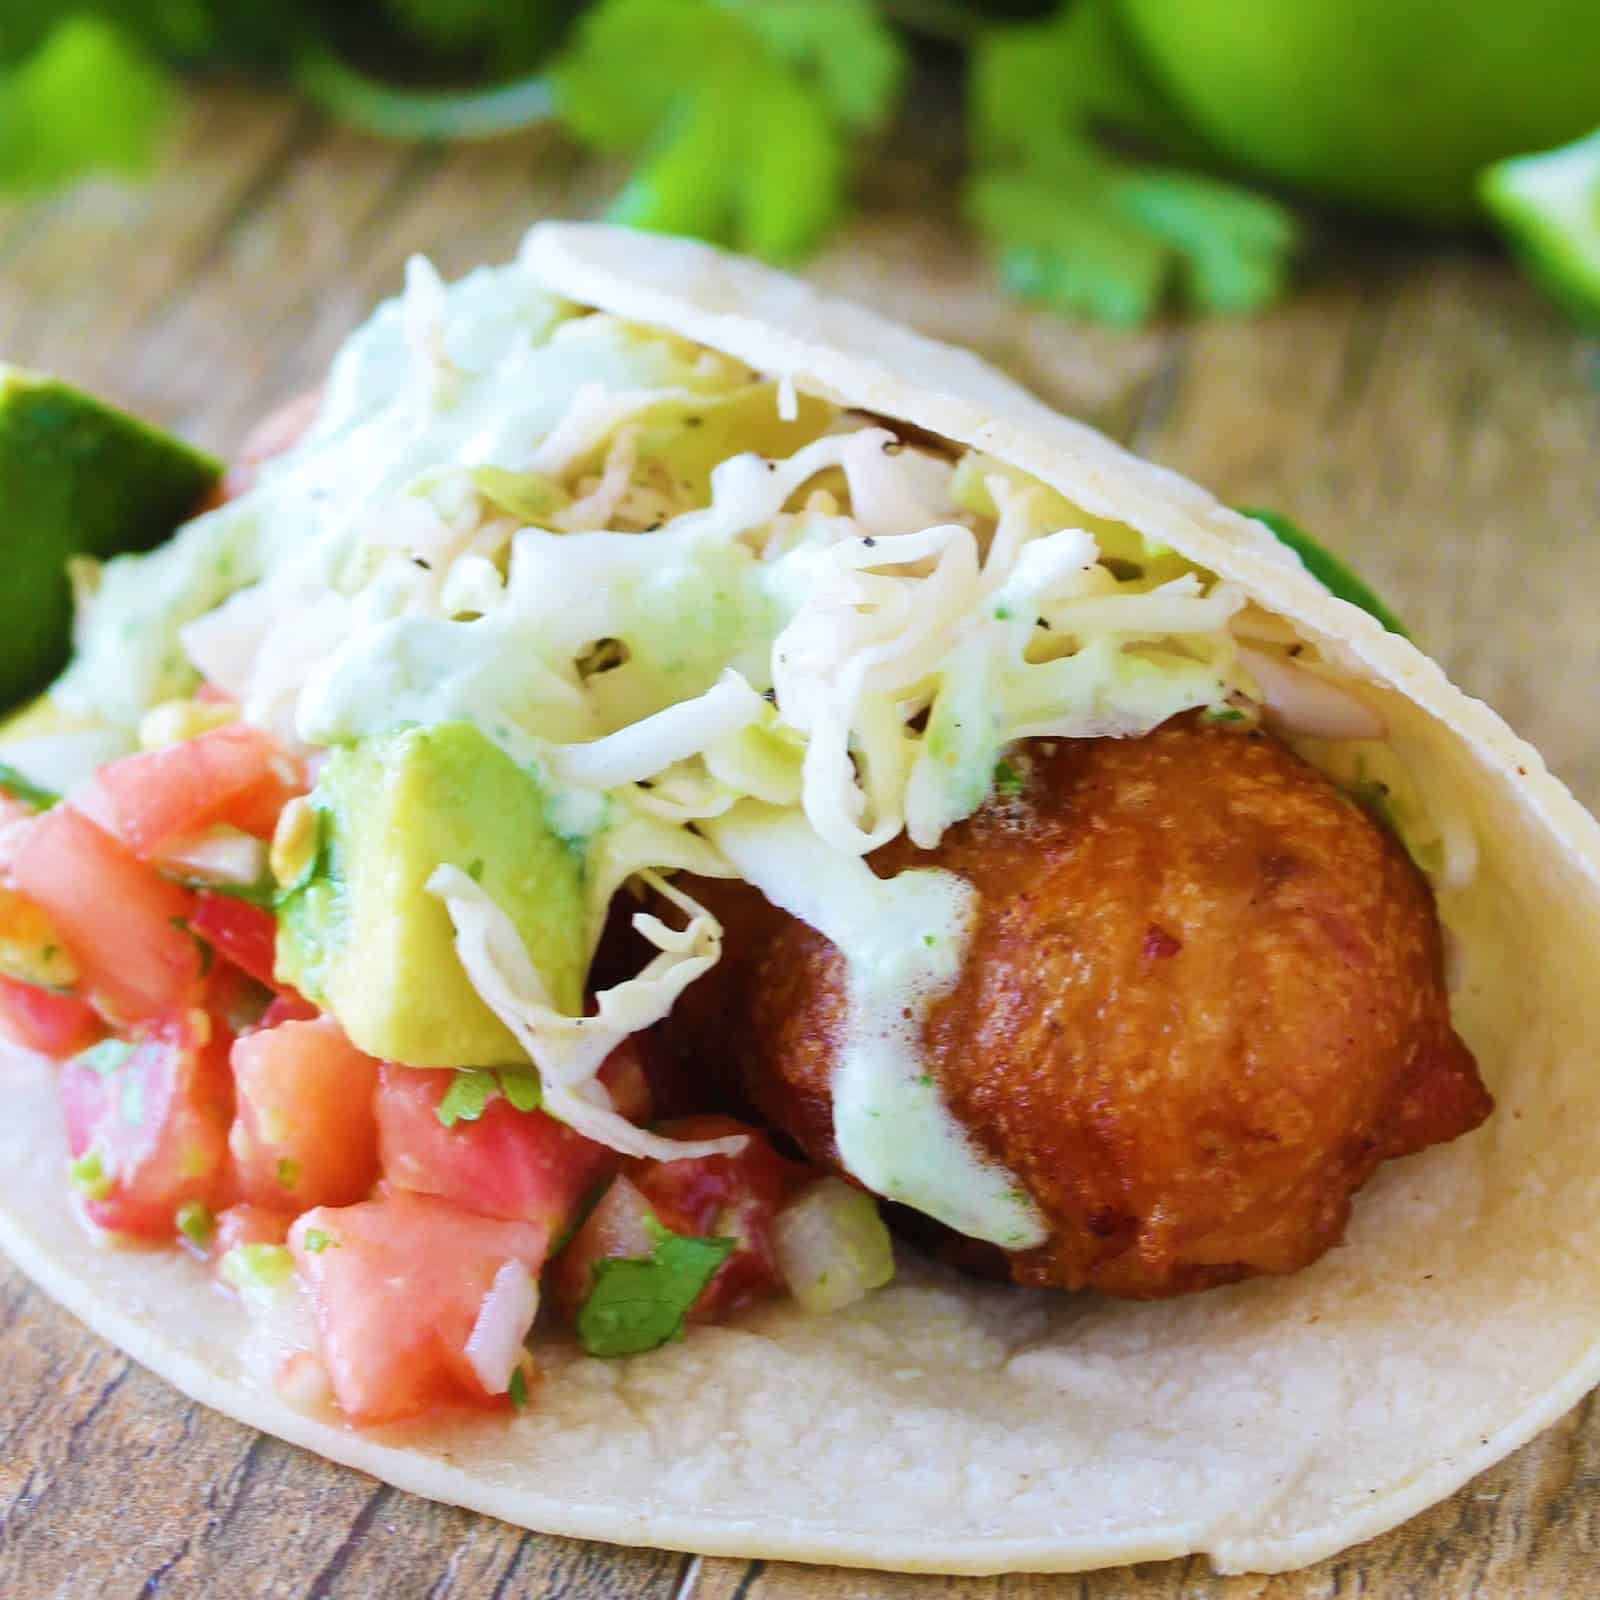 Crispy battered cod is topped with avocado salsa, simple slaw and jalapeno, wrapped in a corn tortilla and served with a lime wedge